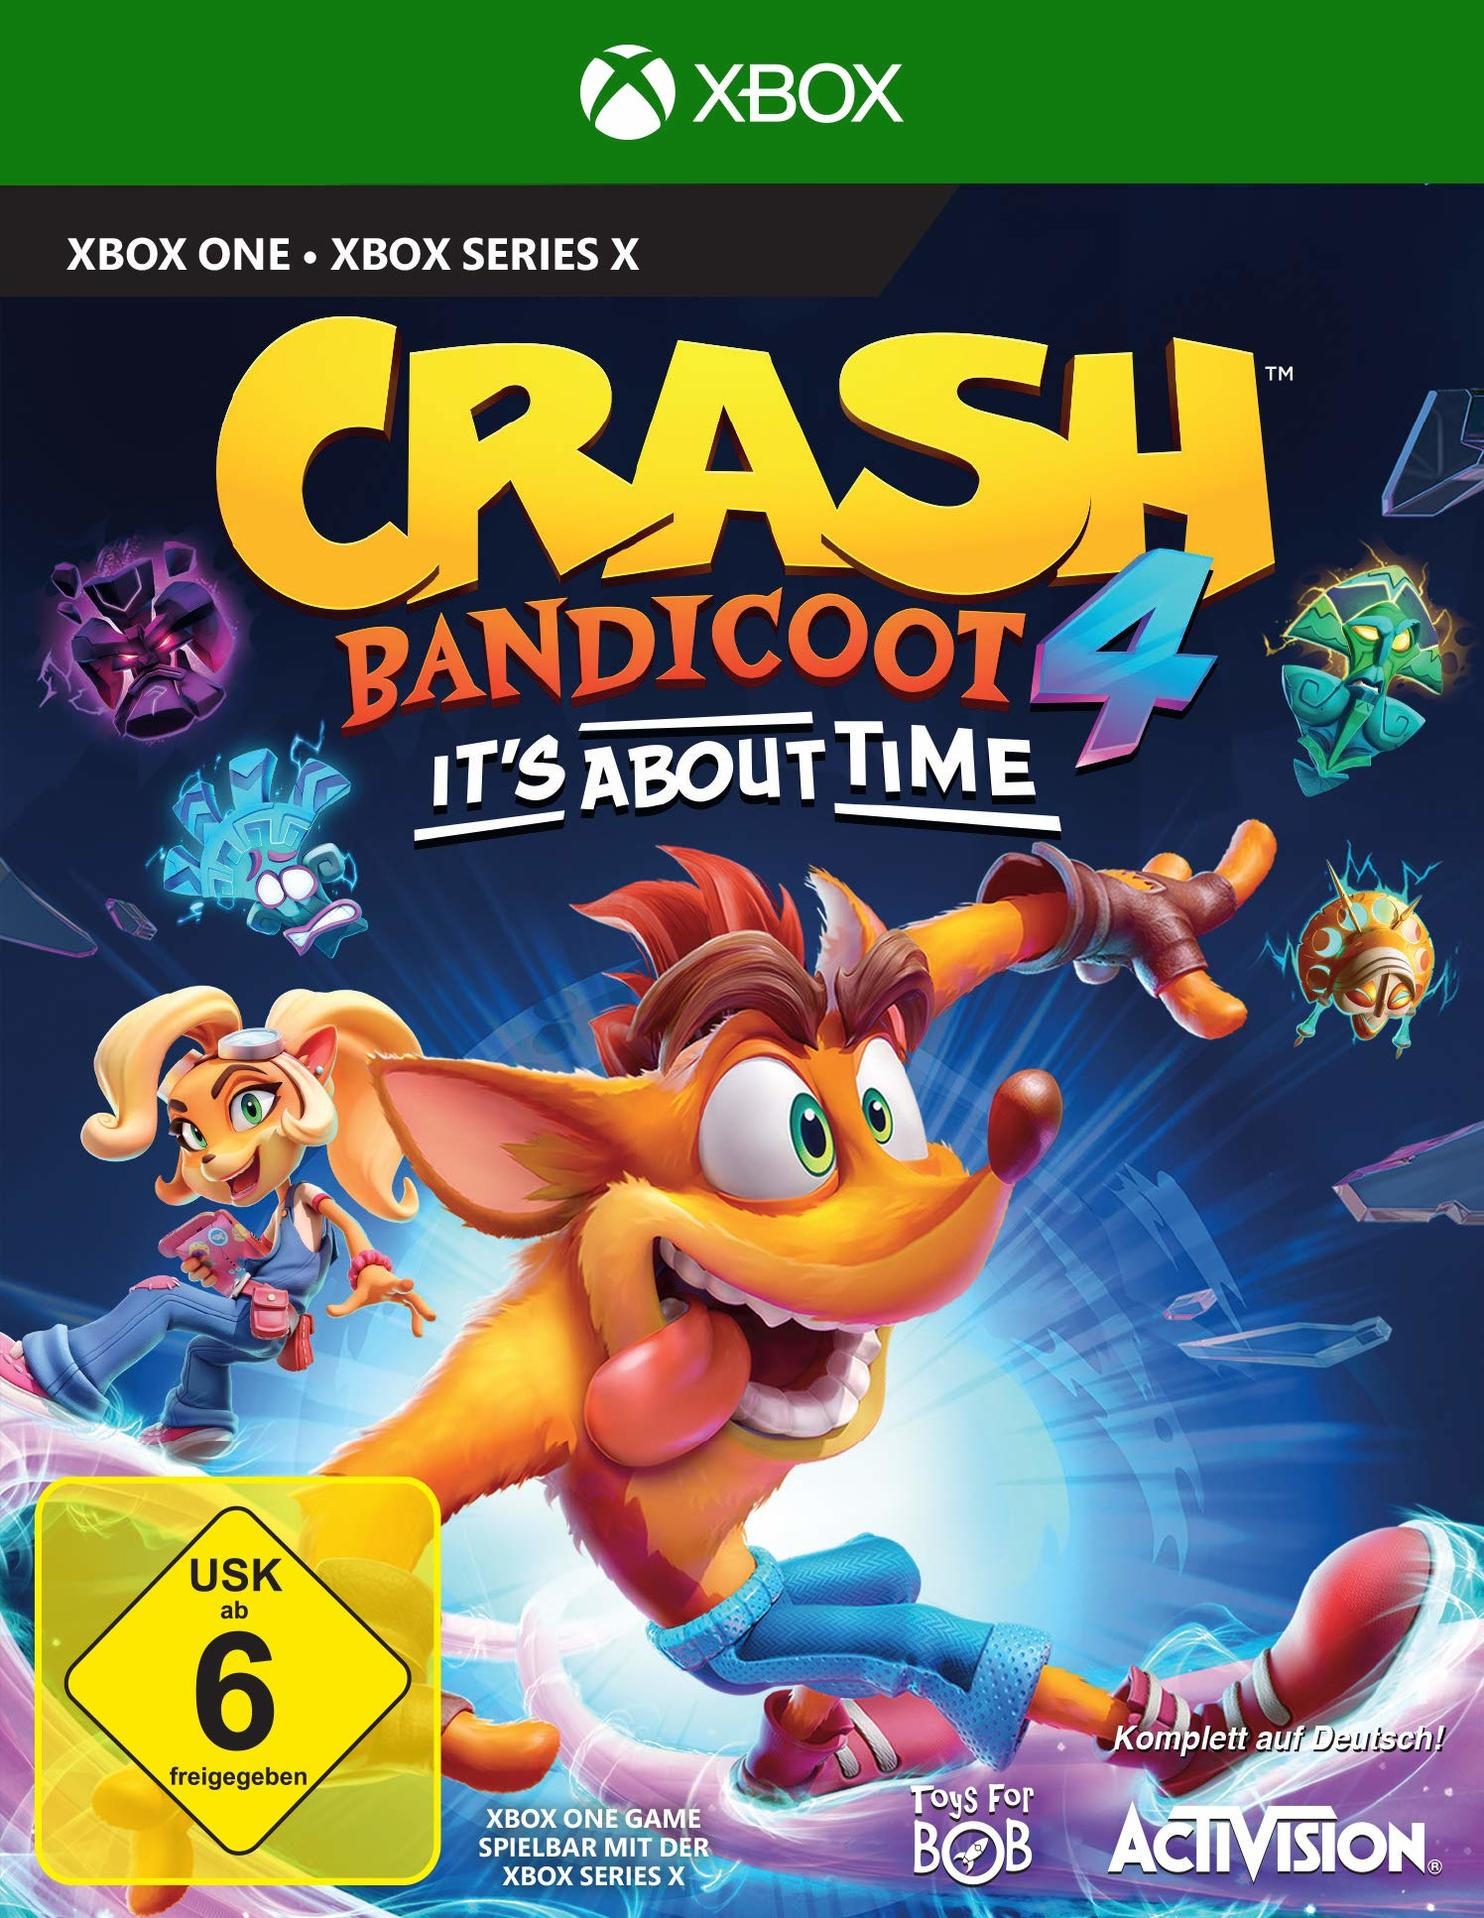 It\'s Crash One] 4: [Xbox - Bandicoot Time About